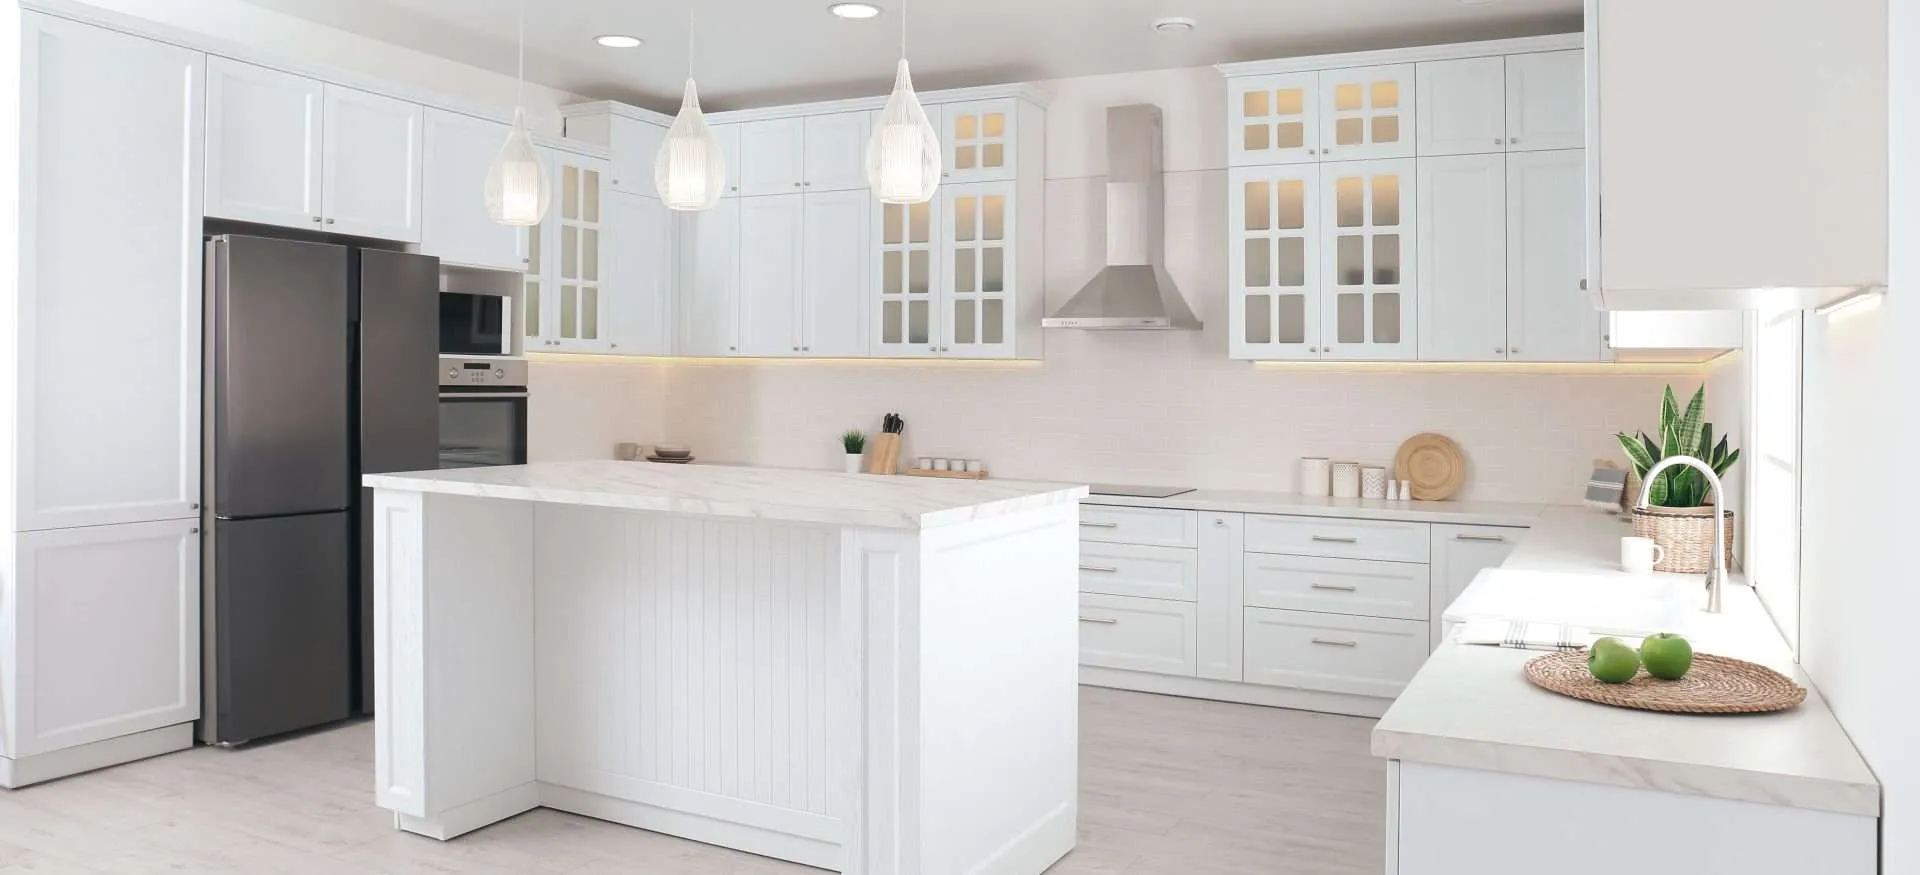 How to Add Value To Your Home With a Kitchen Remodel